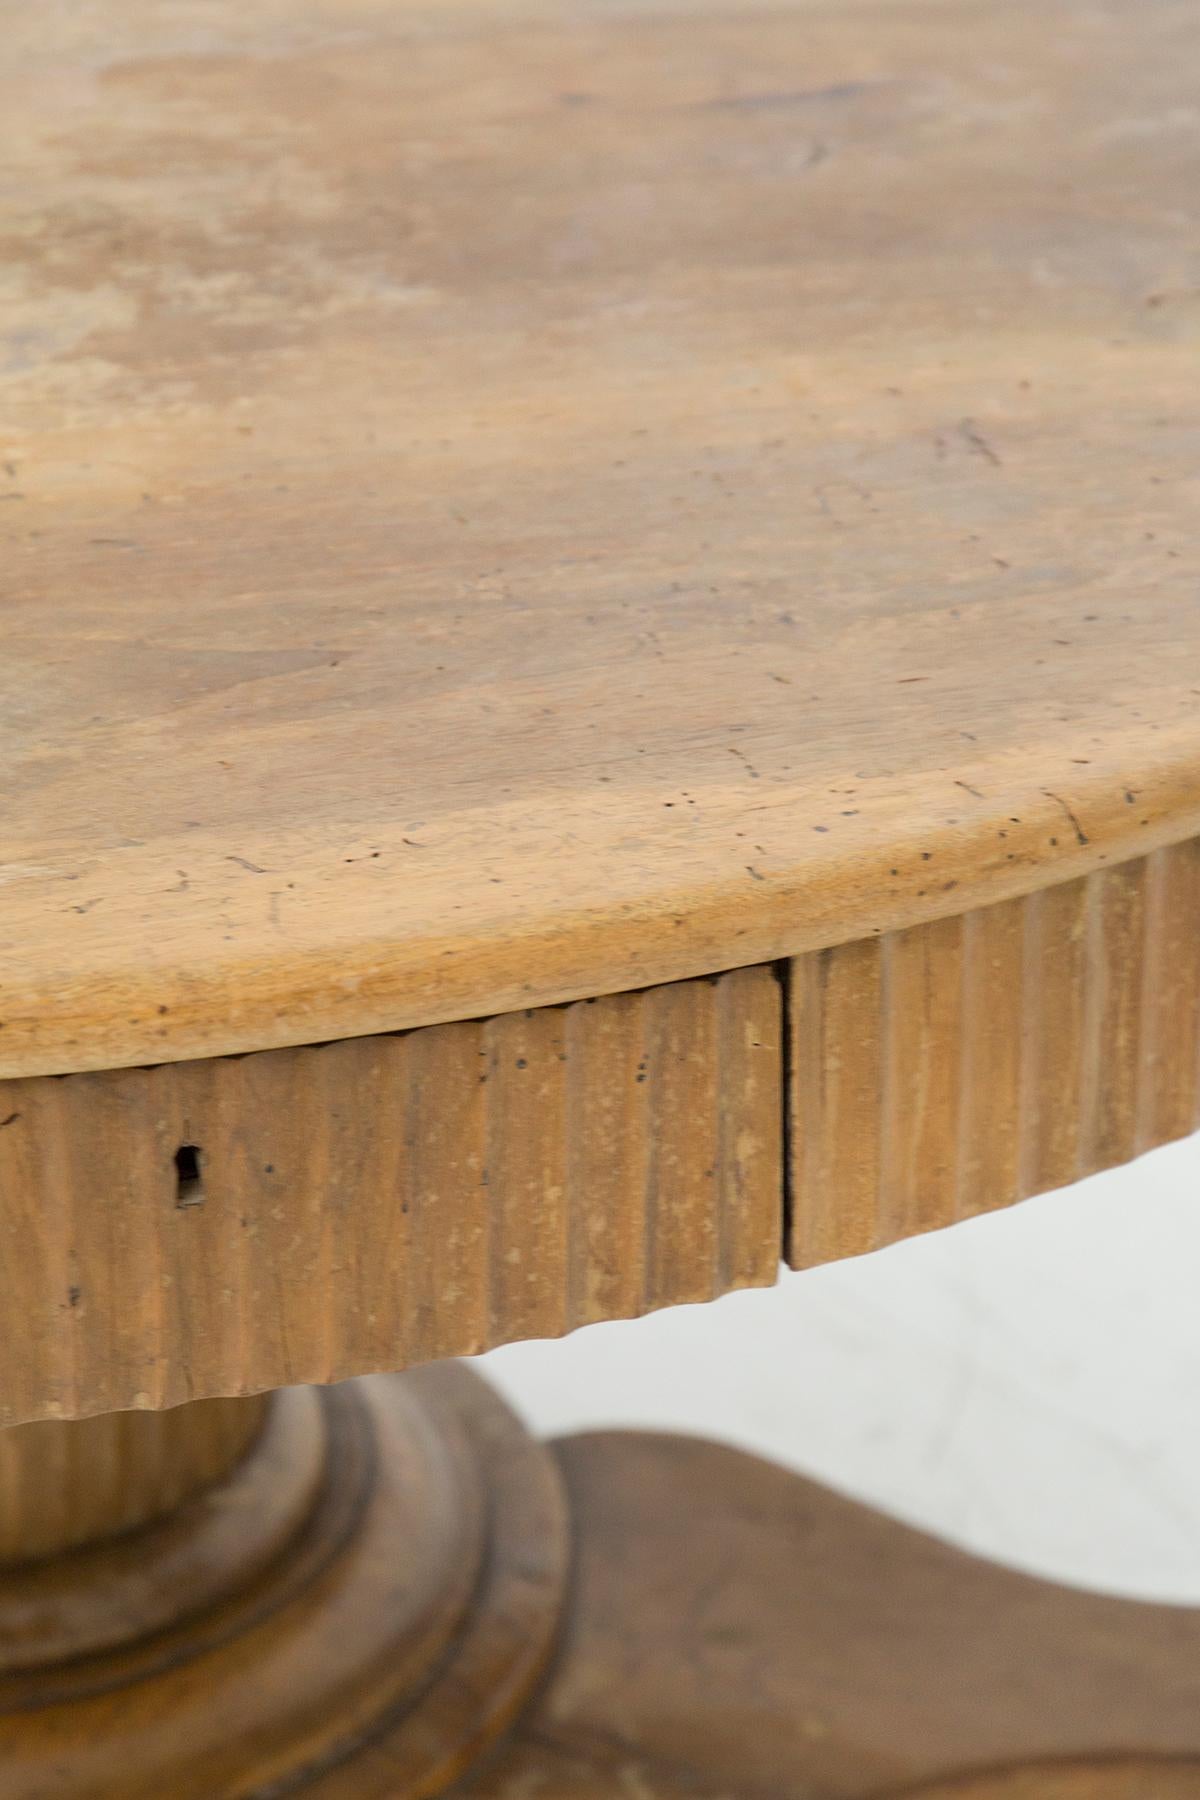 Fine round antique walnut table, 18th century, Italian manufacture.
The table has a very complex base consisting of three large feet, connected to a single central stem.
The feet are three dark lion's paws, very beautiful. These paws each connect